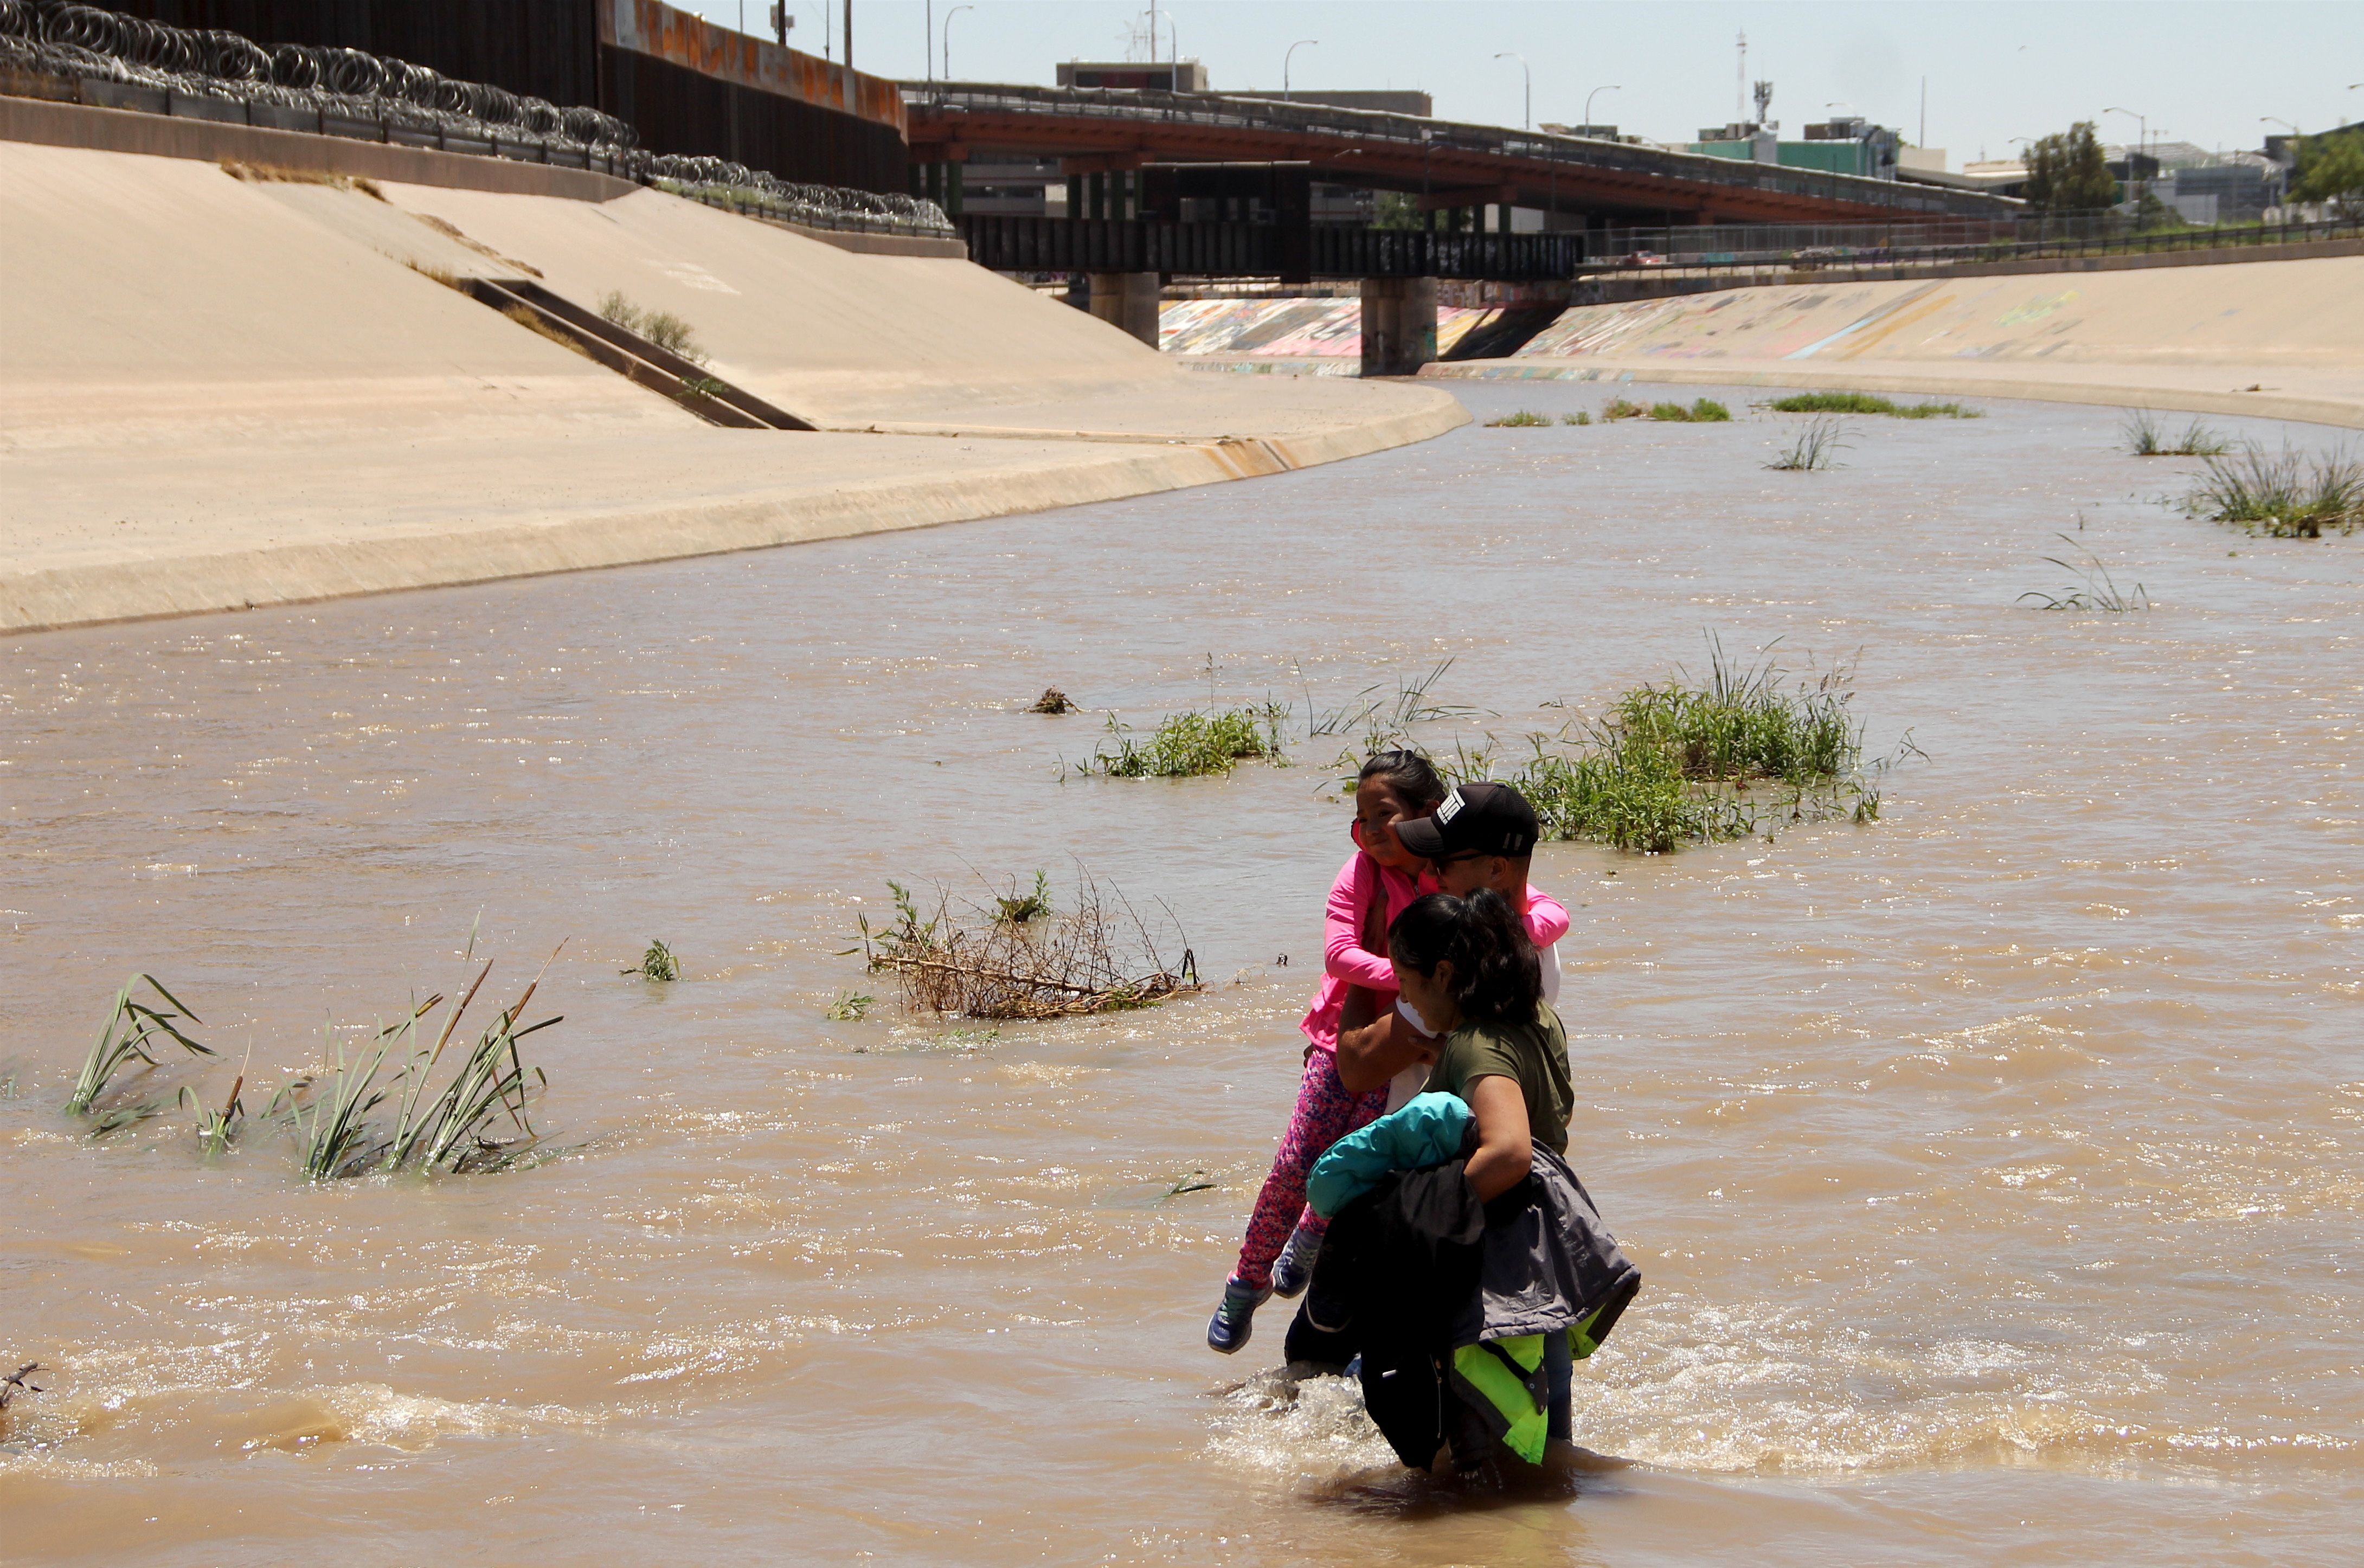 Central American migrants cross the Rio Grande in Ciudad Juarez, on June 12, 2019, before turning themselves into U.S. Border Patrol agents to claim asylum. (Herika Martinez—AFP/Getty Images)